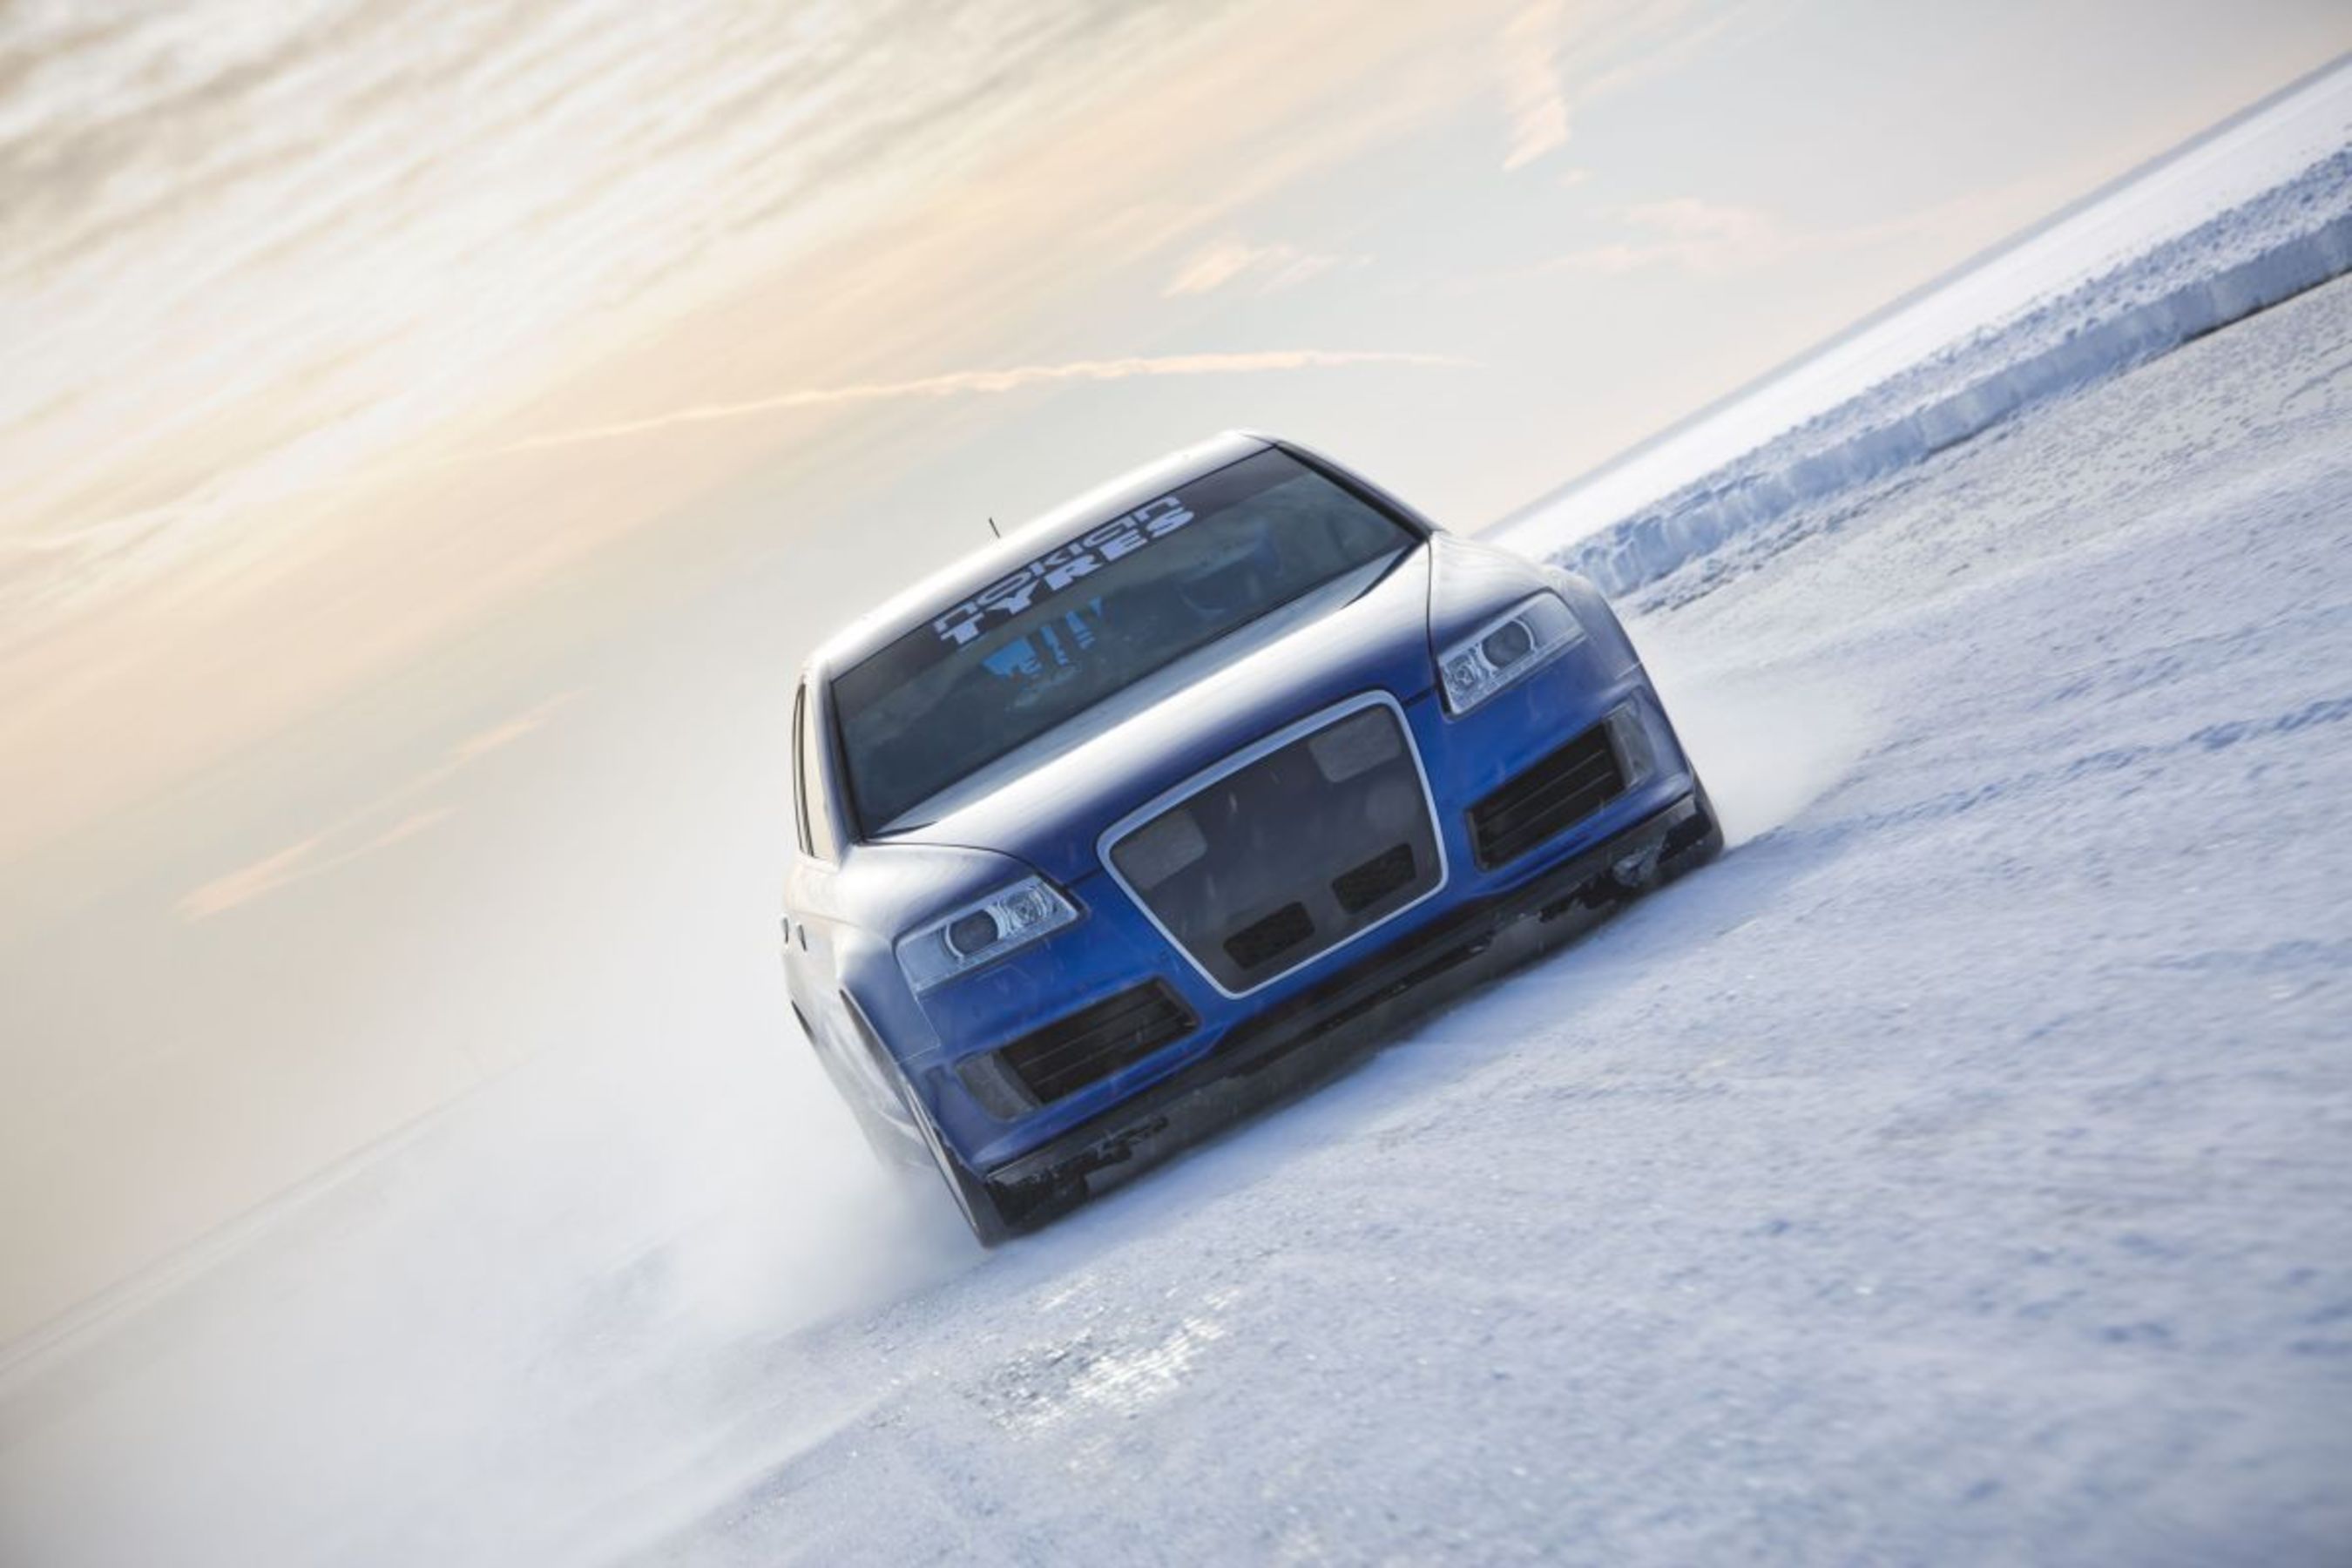 Nokian Tyres Fastest on Ice. The new world record for fastest car on ice was achieved by Nokian Tyres, when test driver Janne Laitinen drove at a speed of 335.713 kilometres per hour (208.602 mph) on the ice of the Gulf of Bothnia on 9 March. Grip and speed like never before were ensured by the new spearhead product for the worldâ€™s leading manufacturer of winter tyres â€“ the Nokian Hakkapeliitta 8 studded tyre. More: www.nokiantyres.com/Fastest-On-Ice (PRNewsFoto/Nokian Tyres)